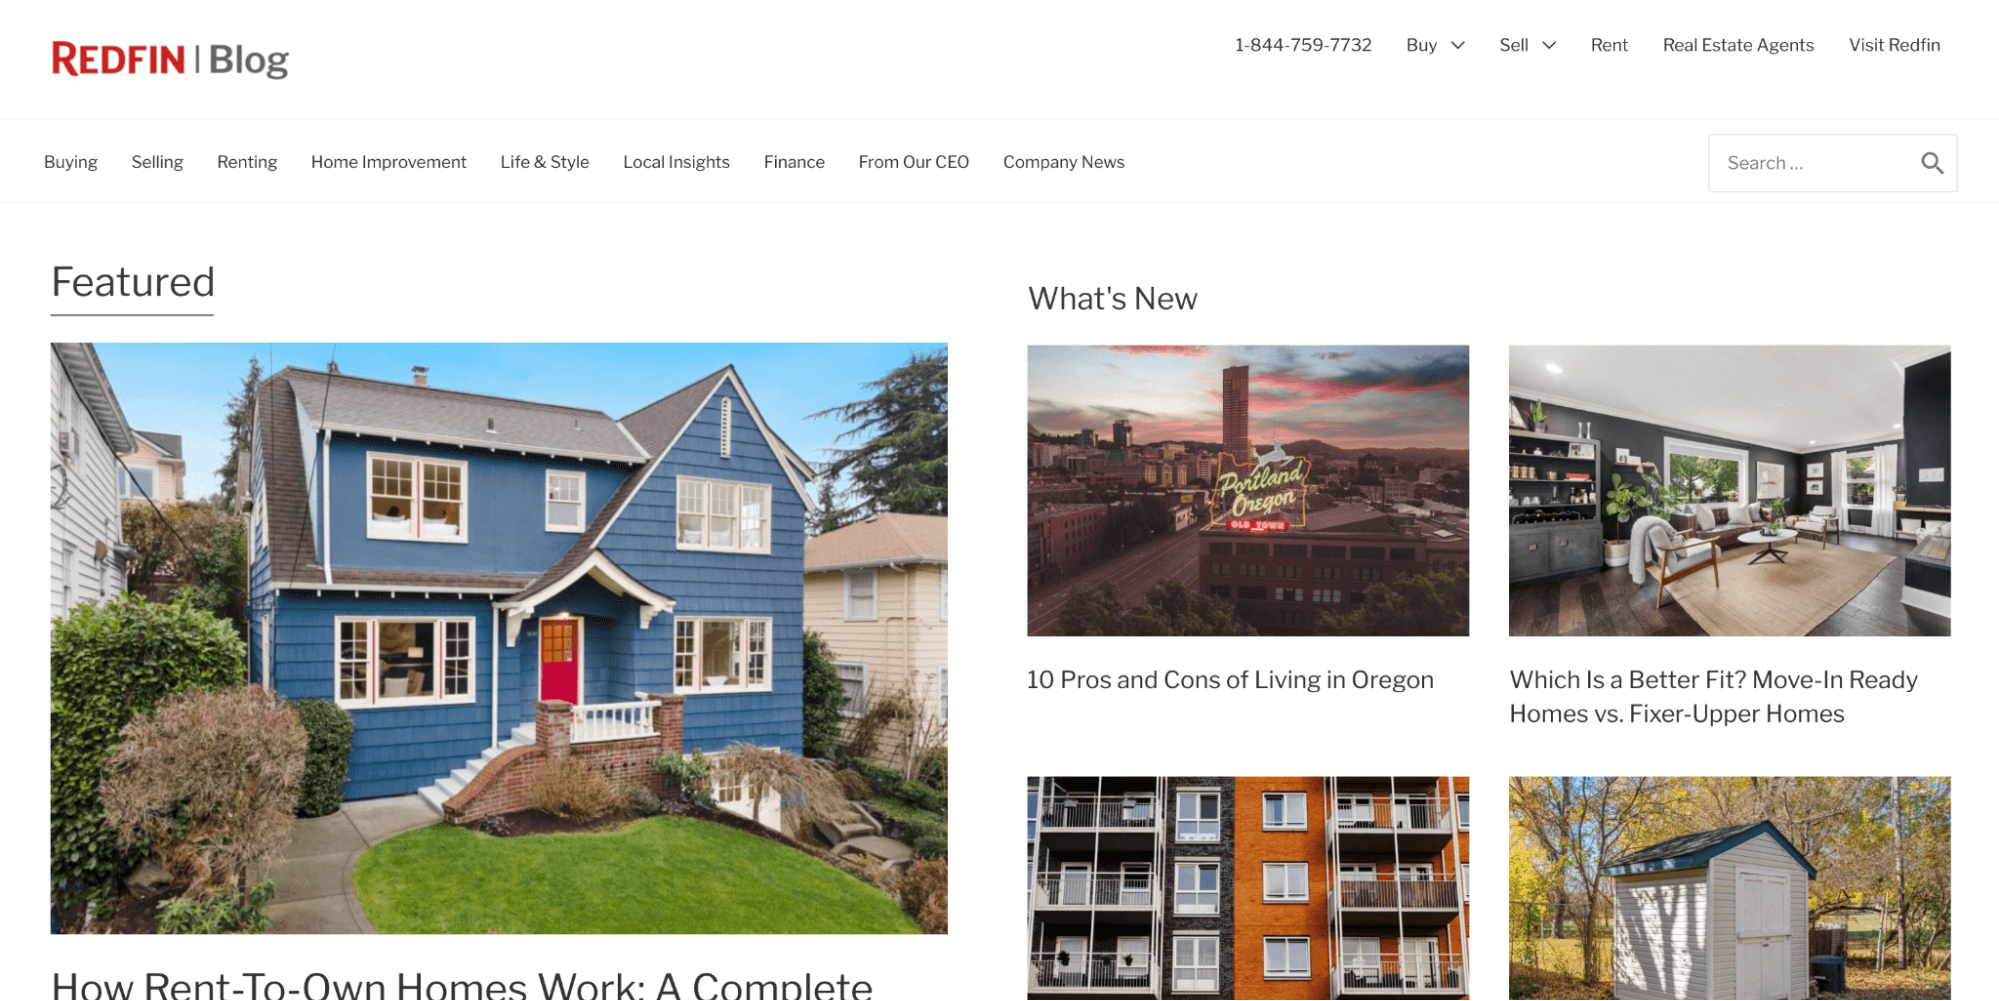 RedFin blog homepage